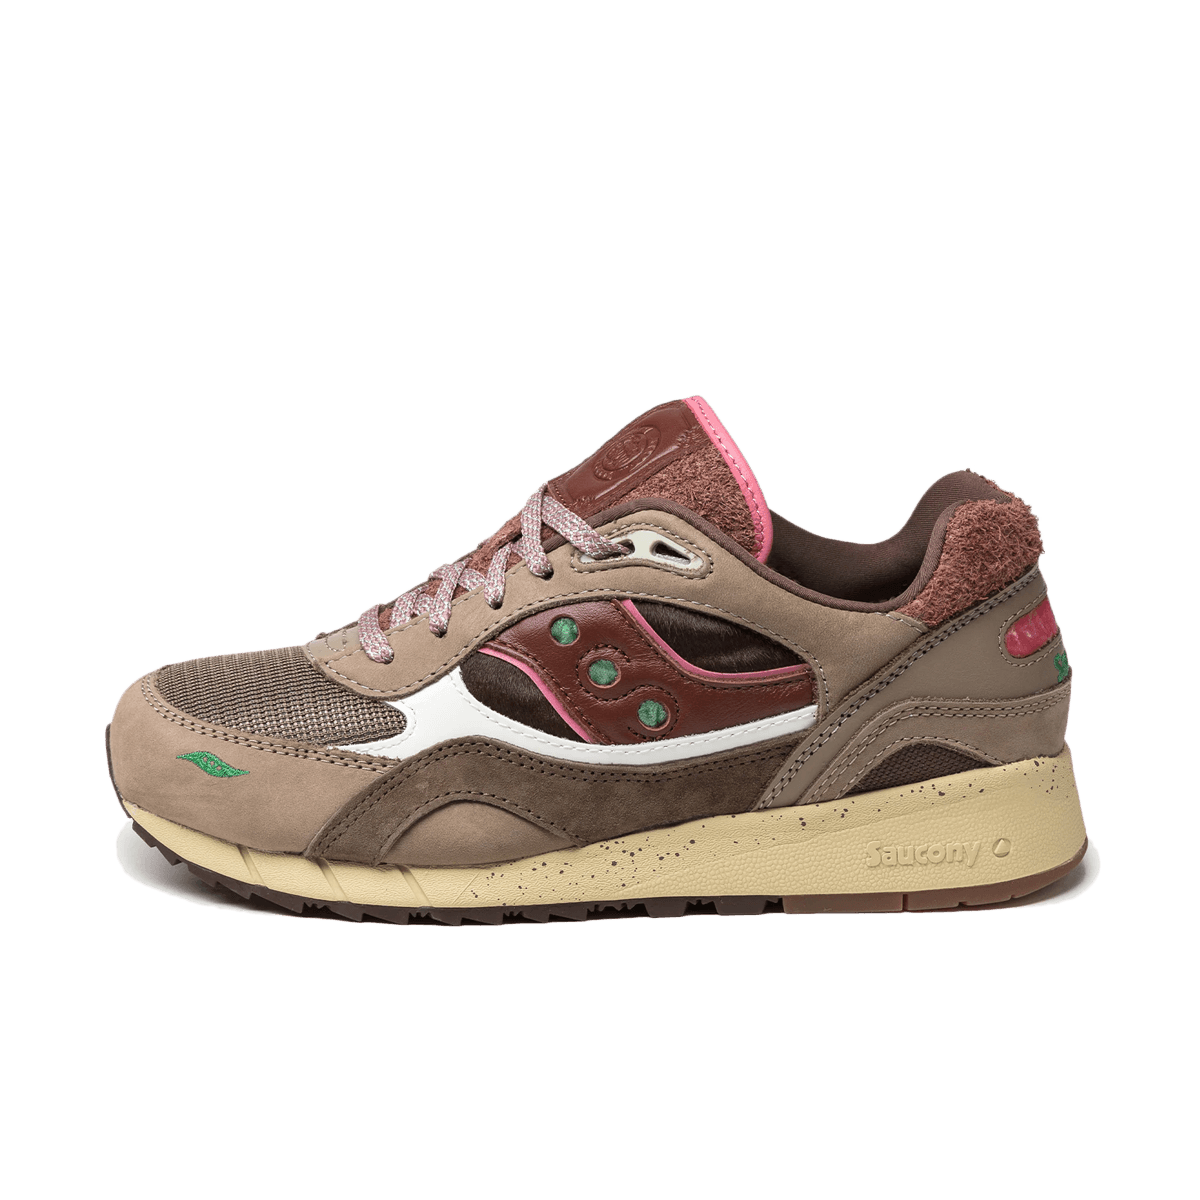 FEATURE x Saucony Shadow 6000 'Chocolate Chip' S70607-1